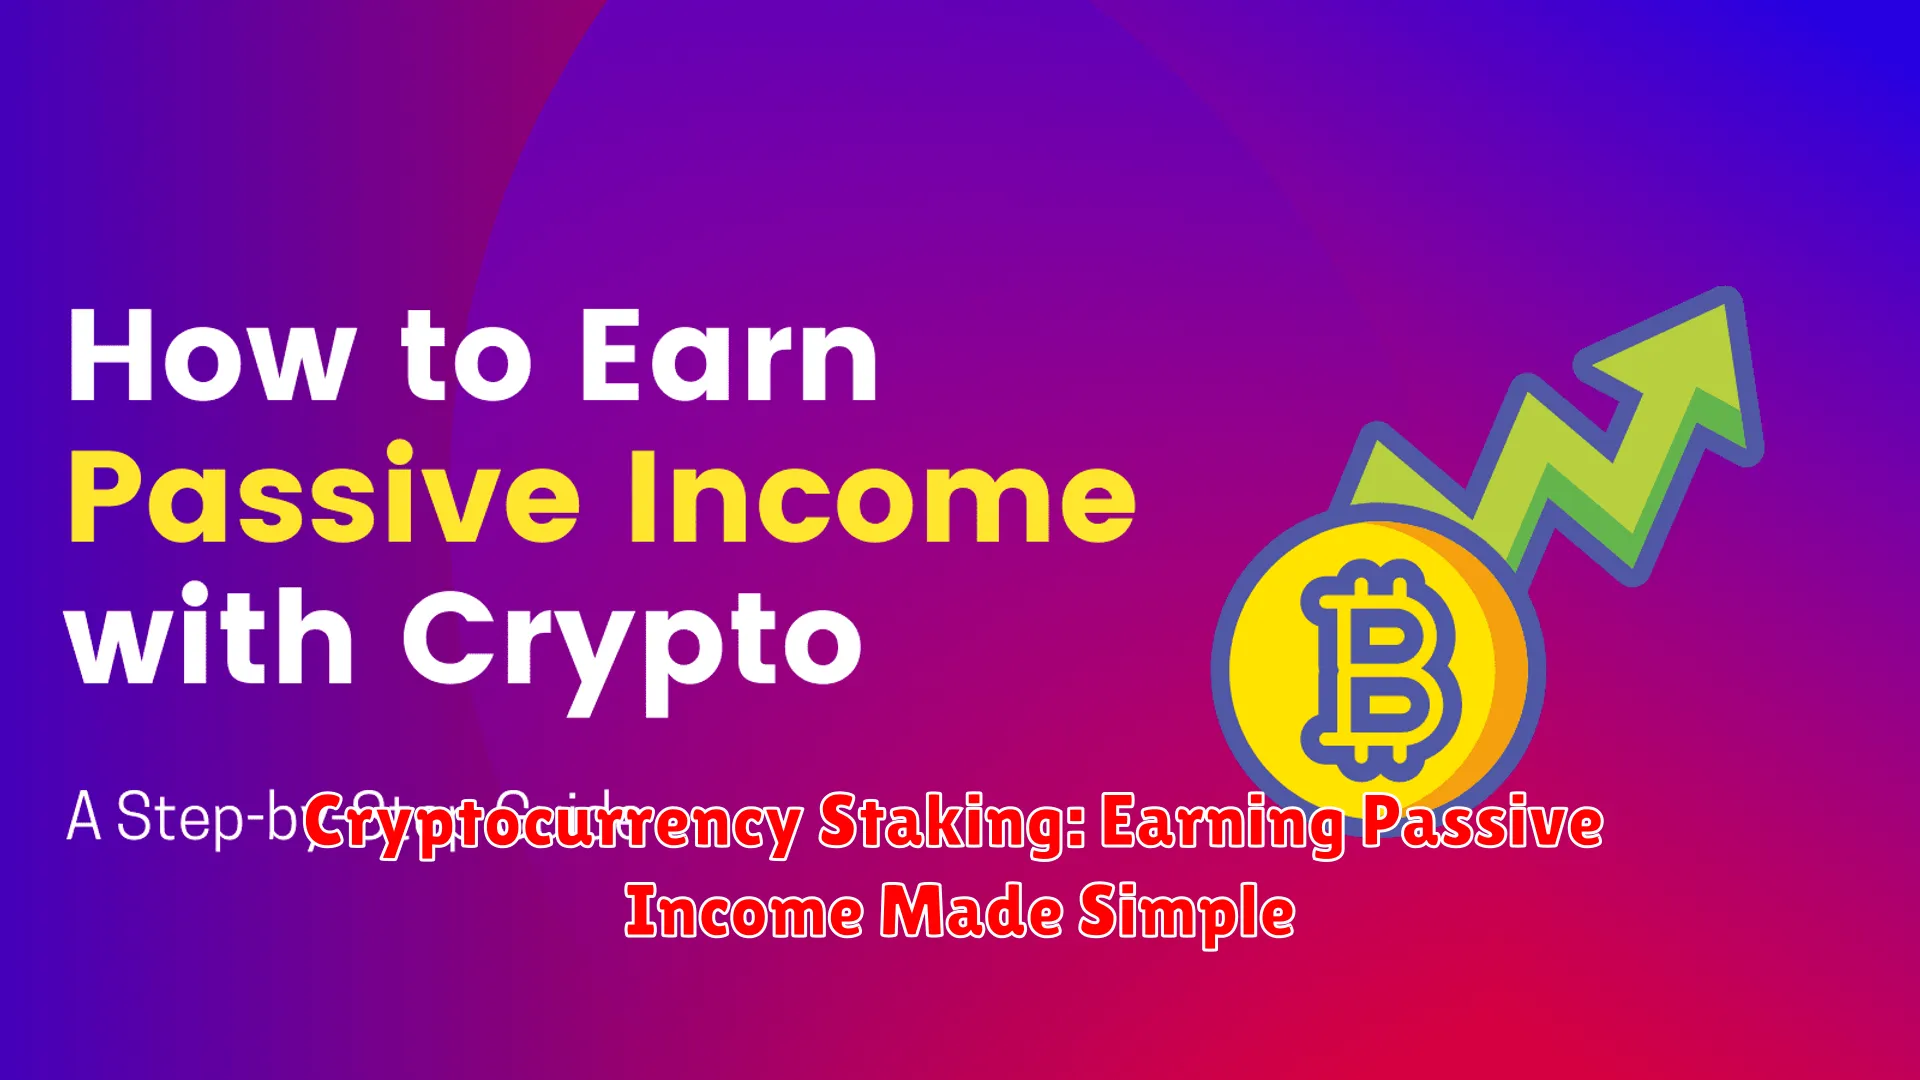 Cryptocurrency Staking: Earning Passive Income Made Simple